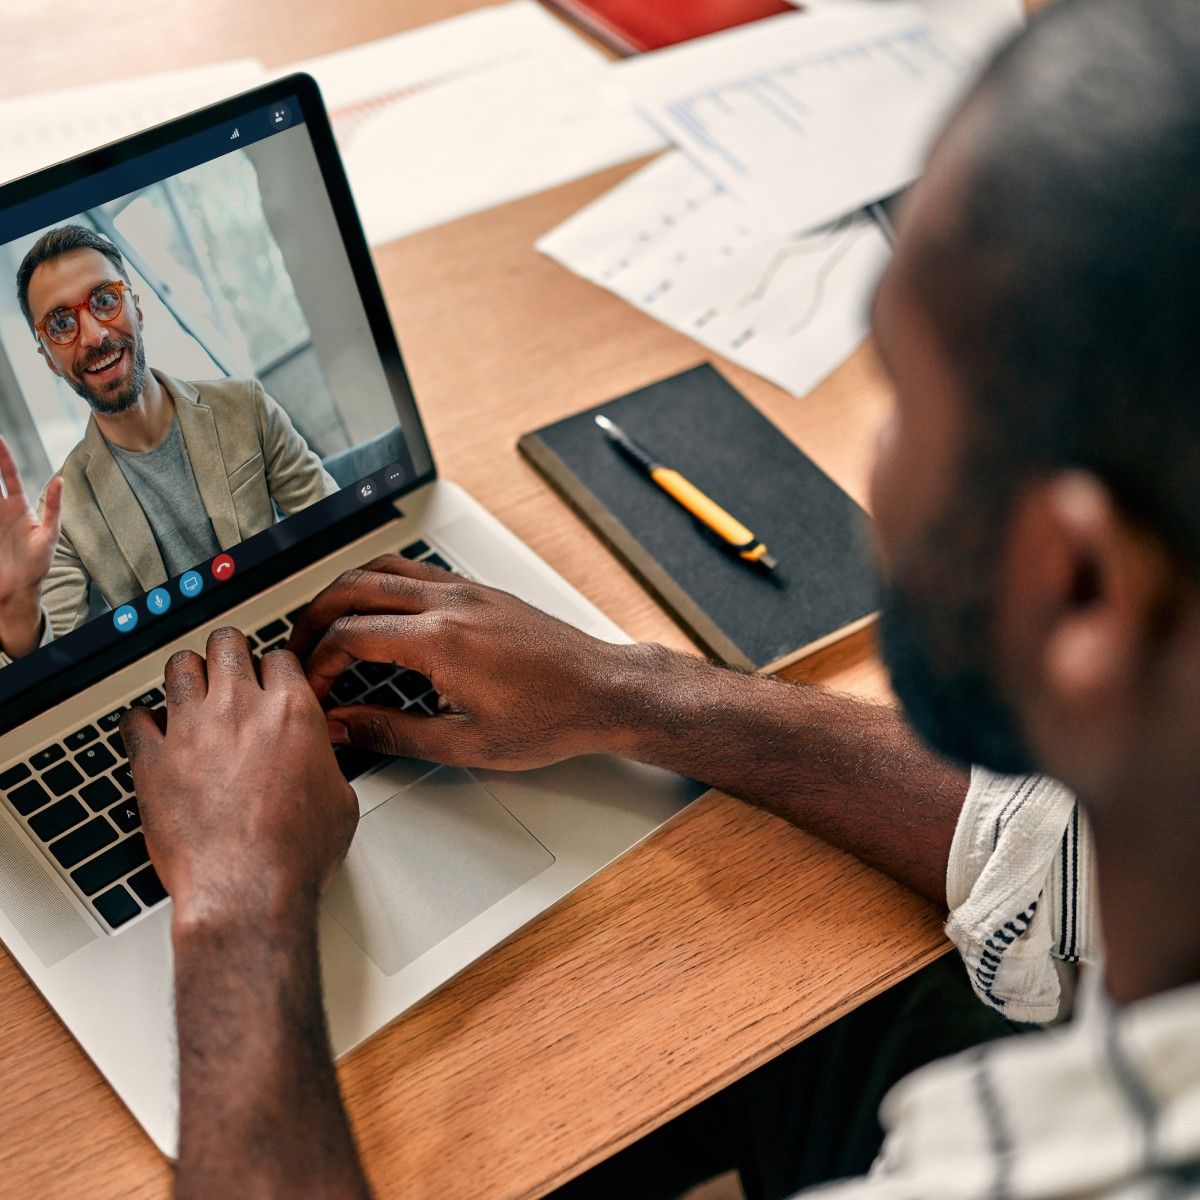 A rear-view of a Black man video conferencing with his coworker on Zoom. The desk is covered with paperwork, and the coworker on the screen is waving and smiling.